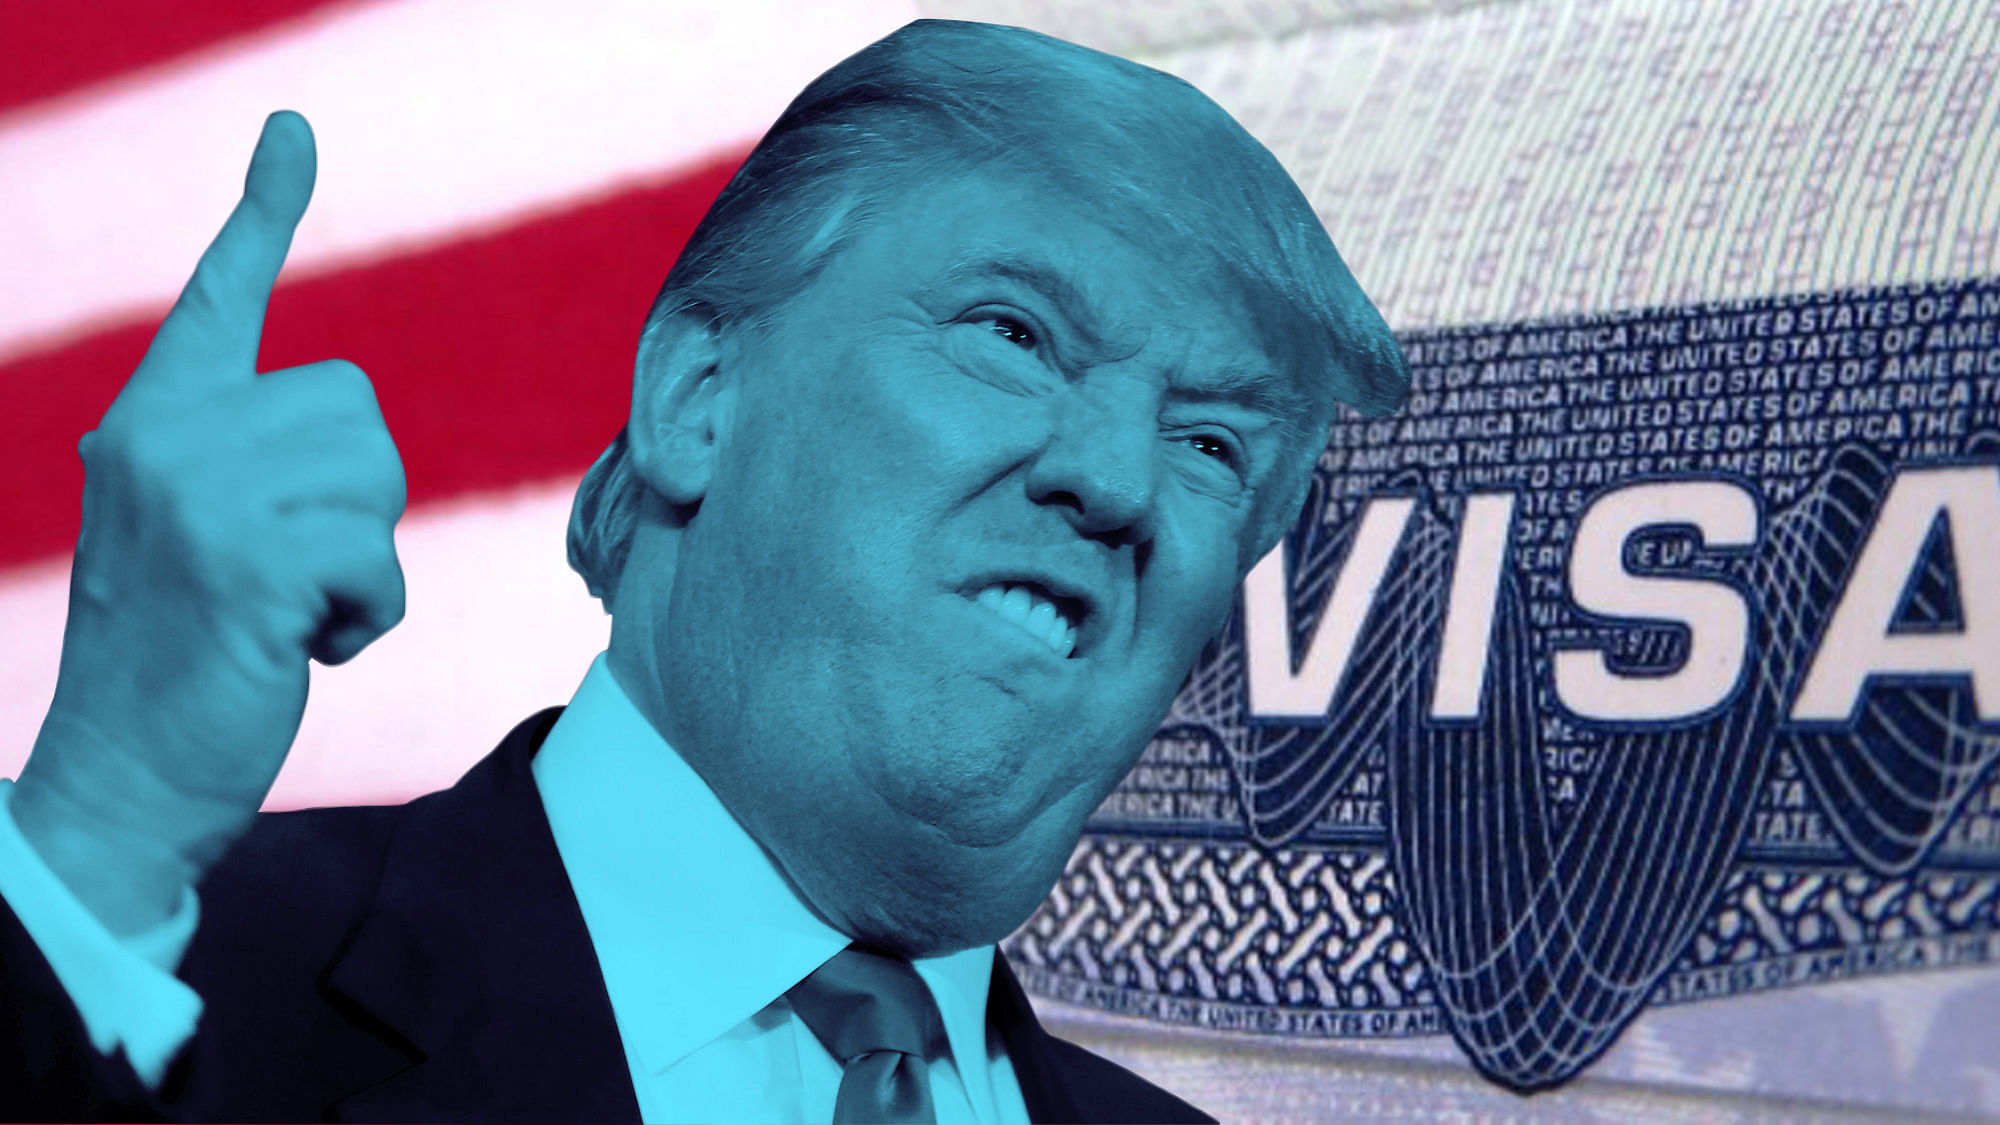 US President Donald Trump had promised to clamp down on immigration during his campaign.